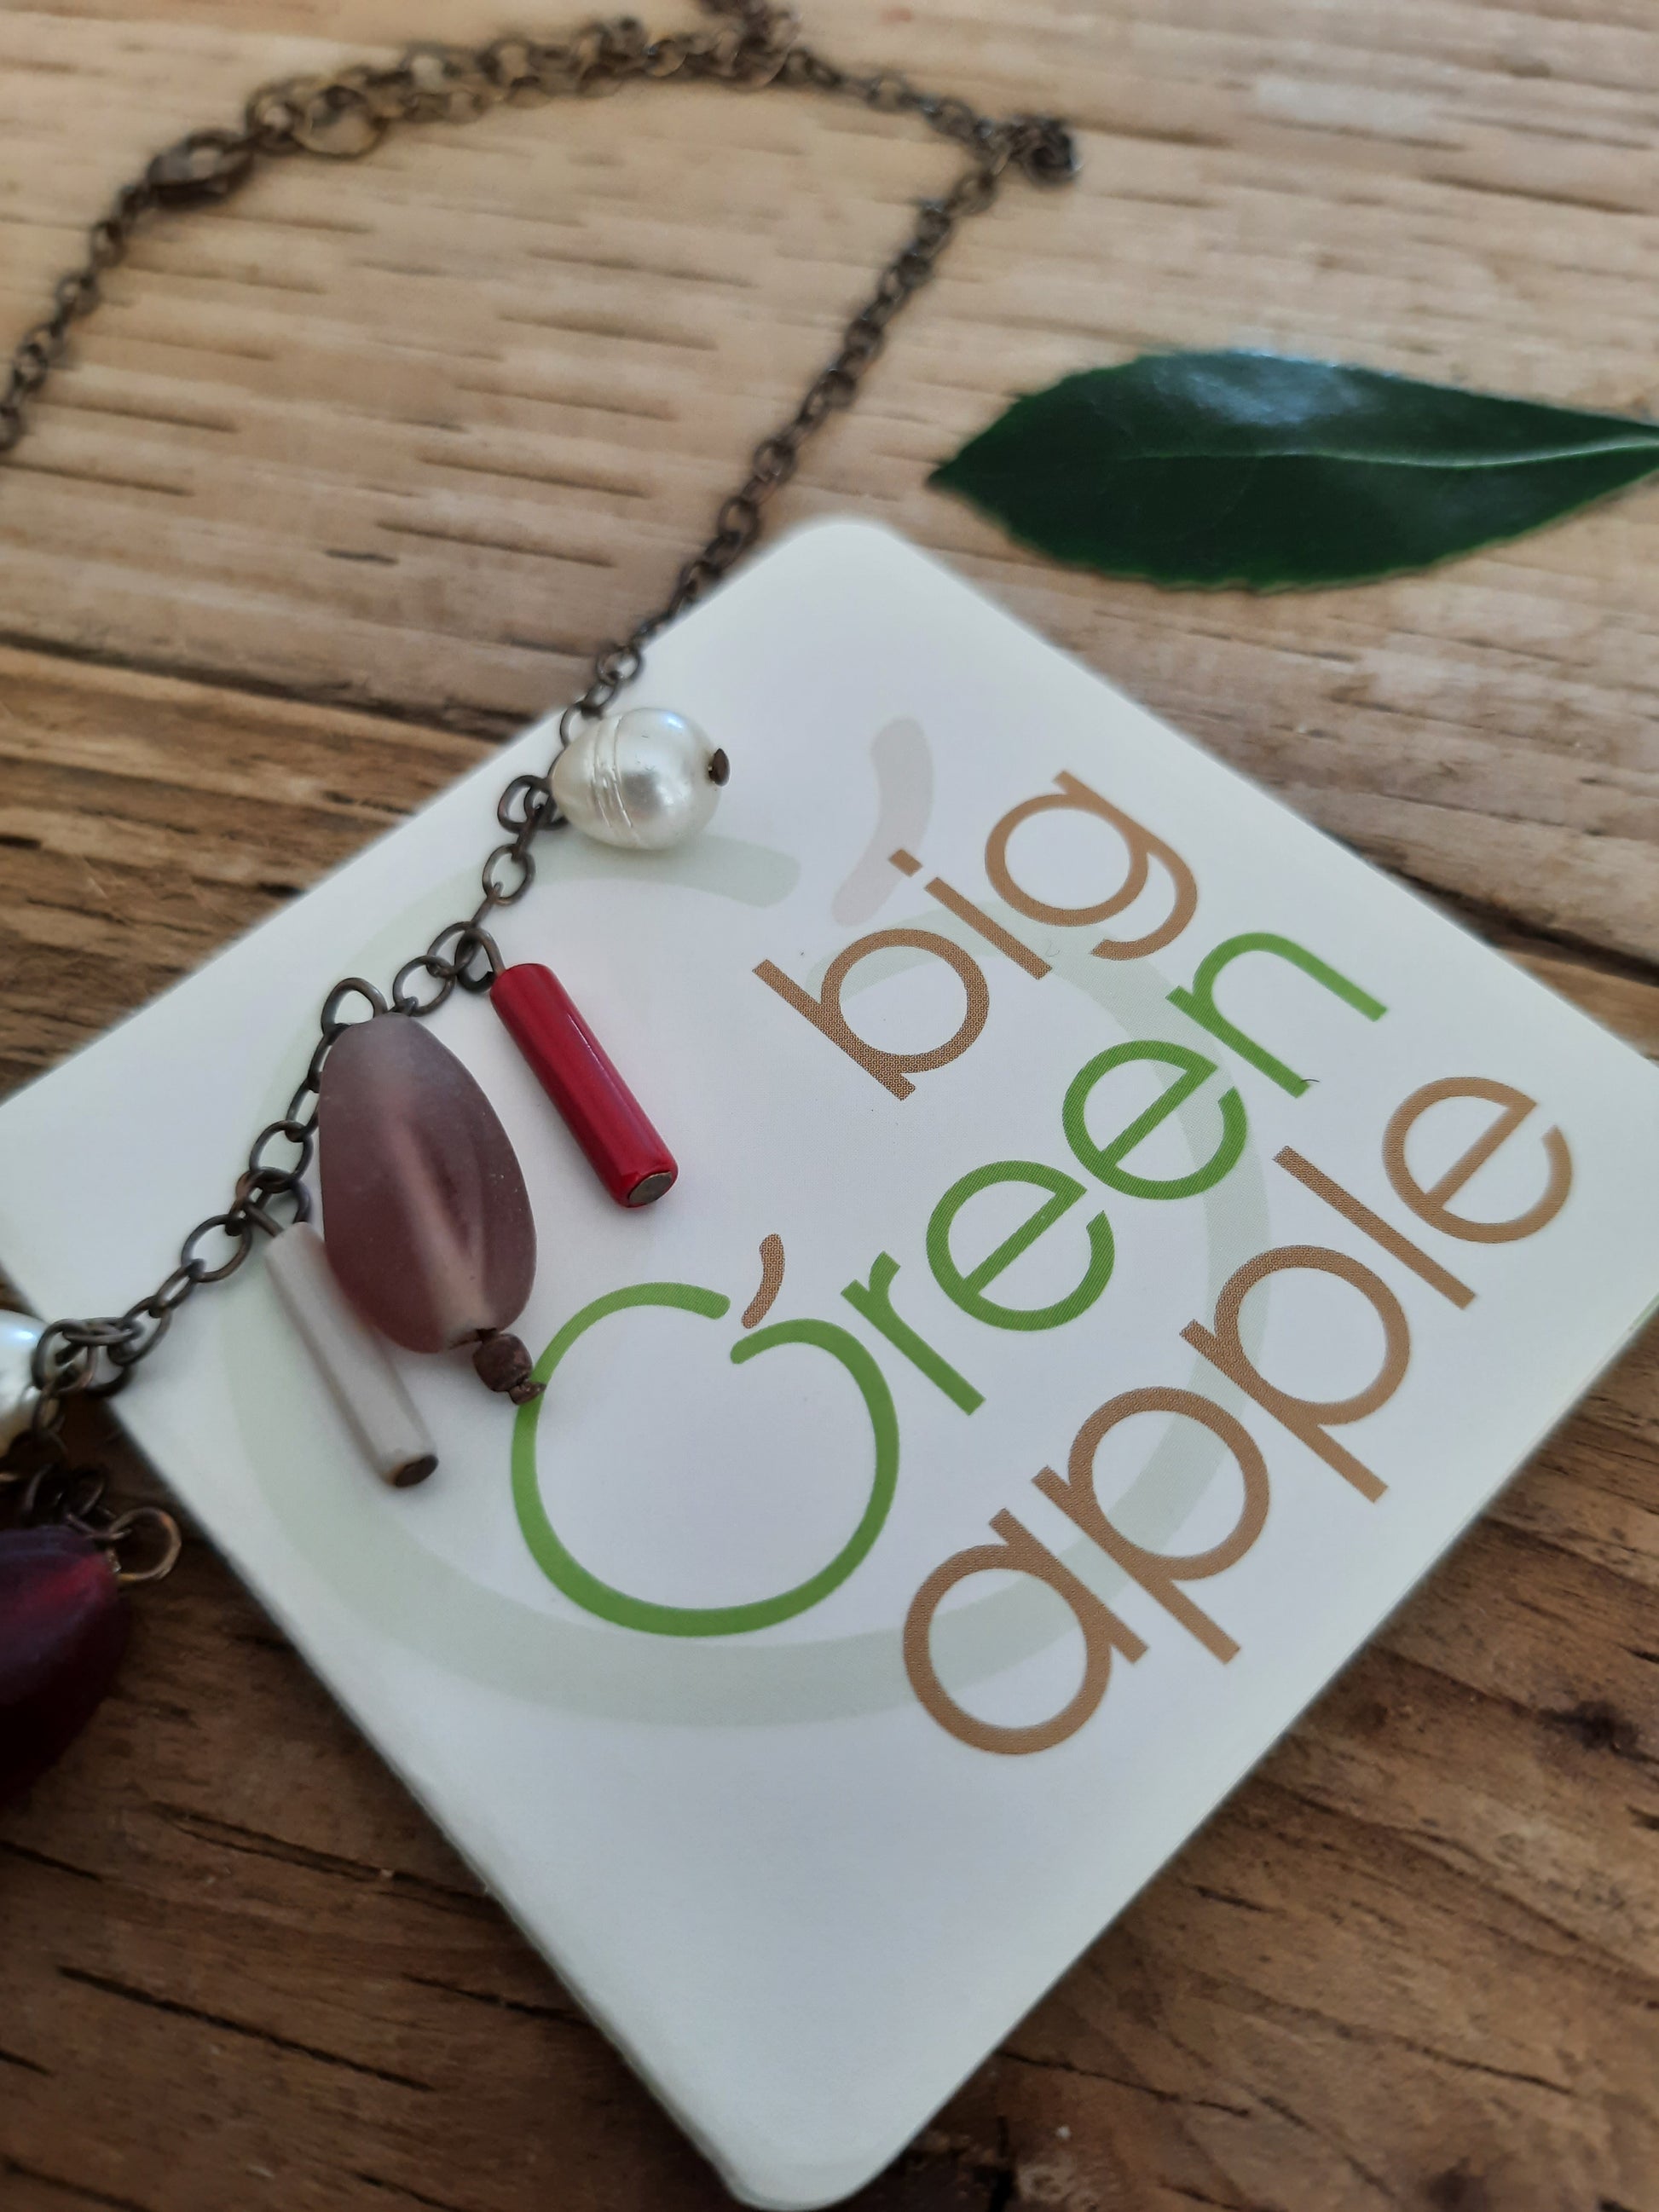 Fair Trade Jewellery, Gift, Ethical Jewellery UK, Eco Friendly Gift Ideas, Sustainable Brands, BIG GREEN APPLE 